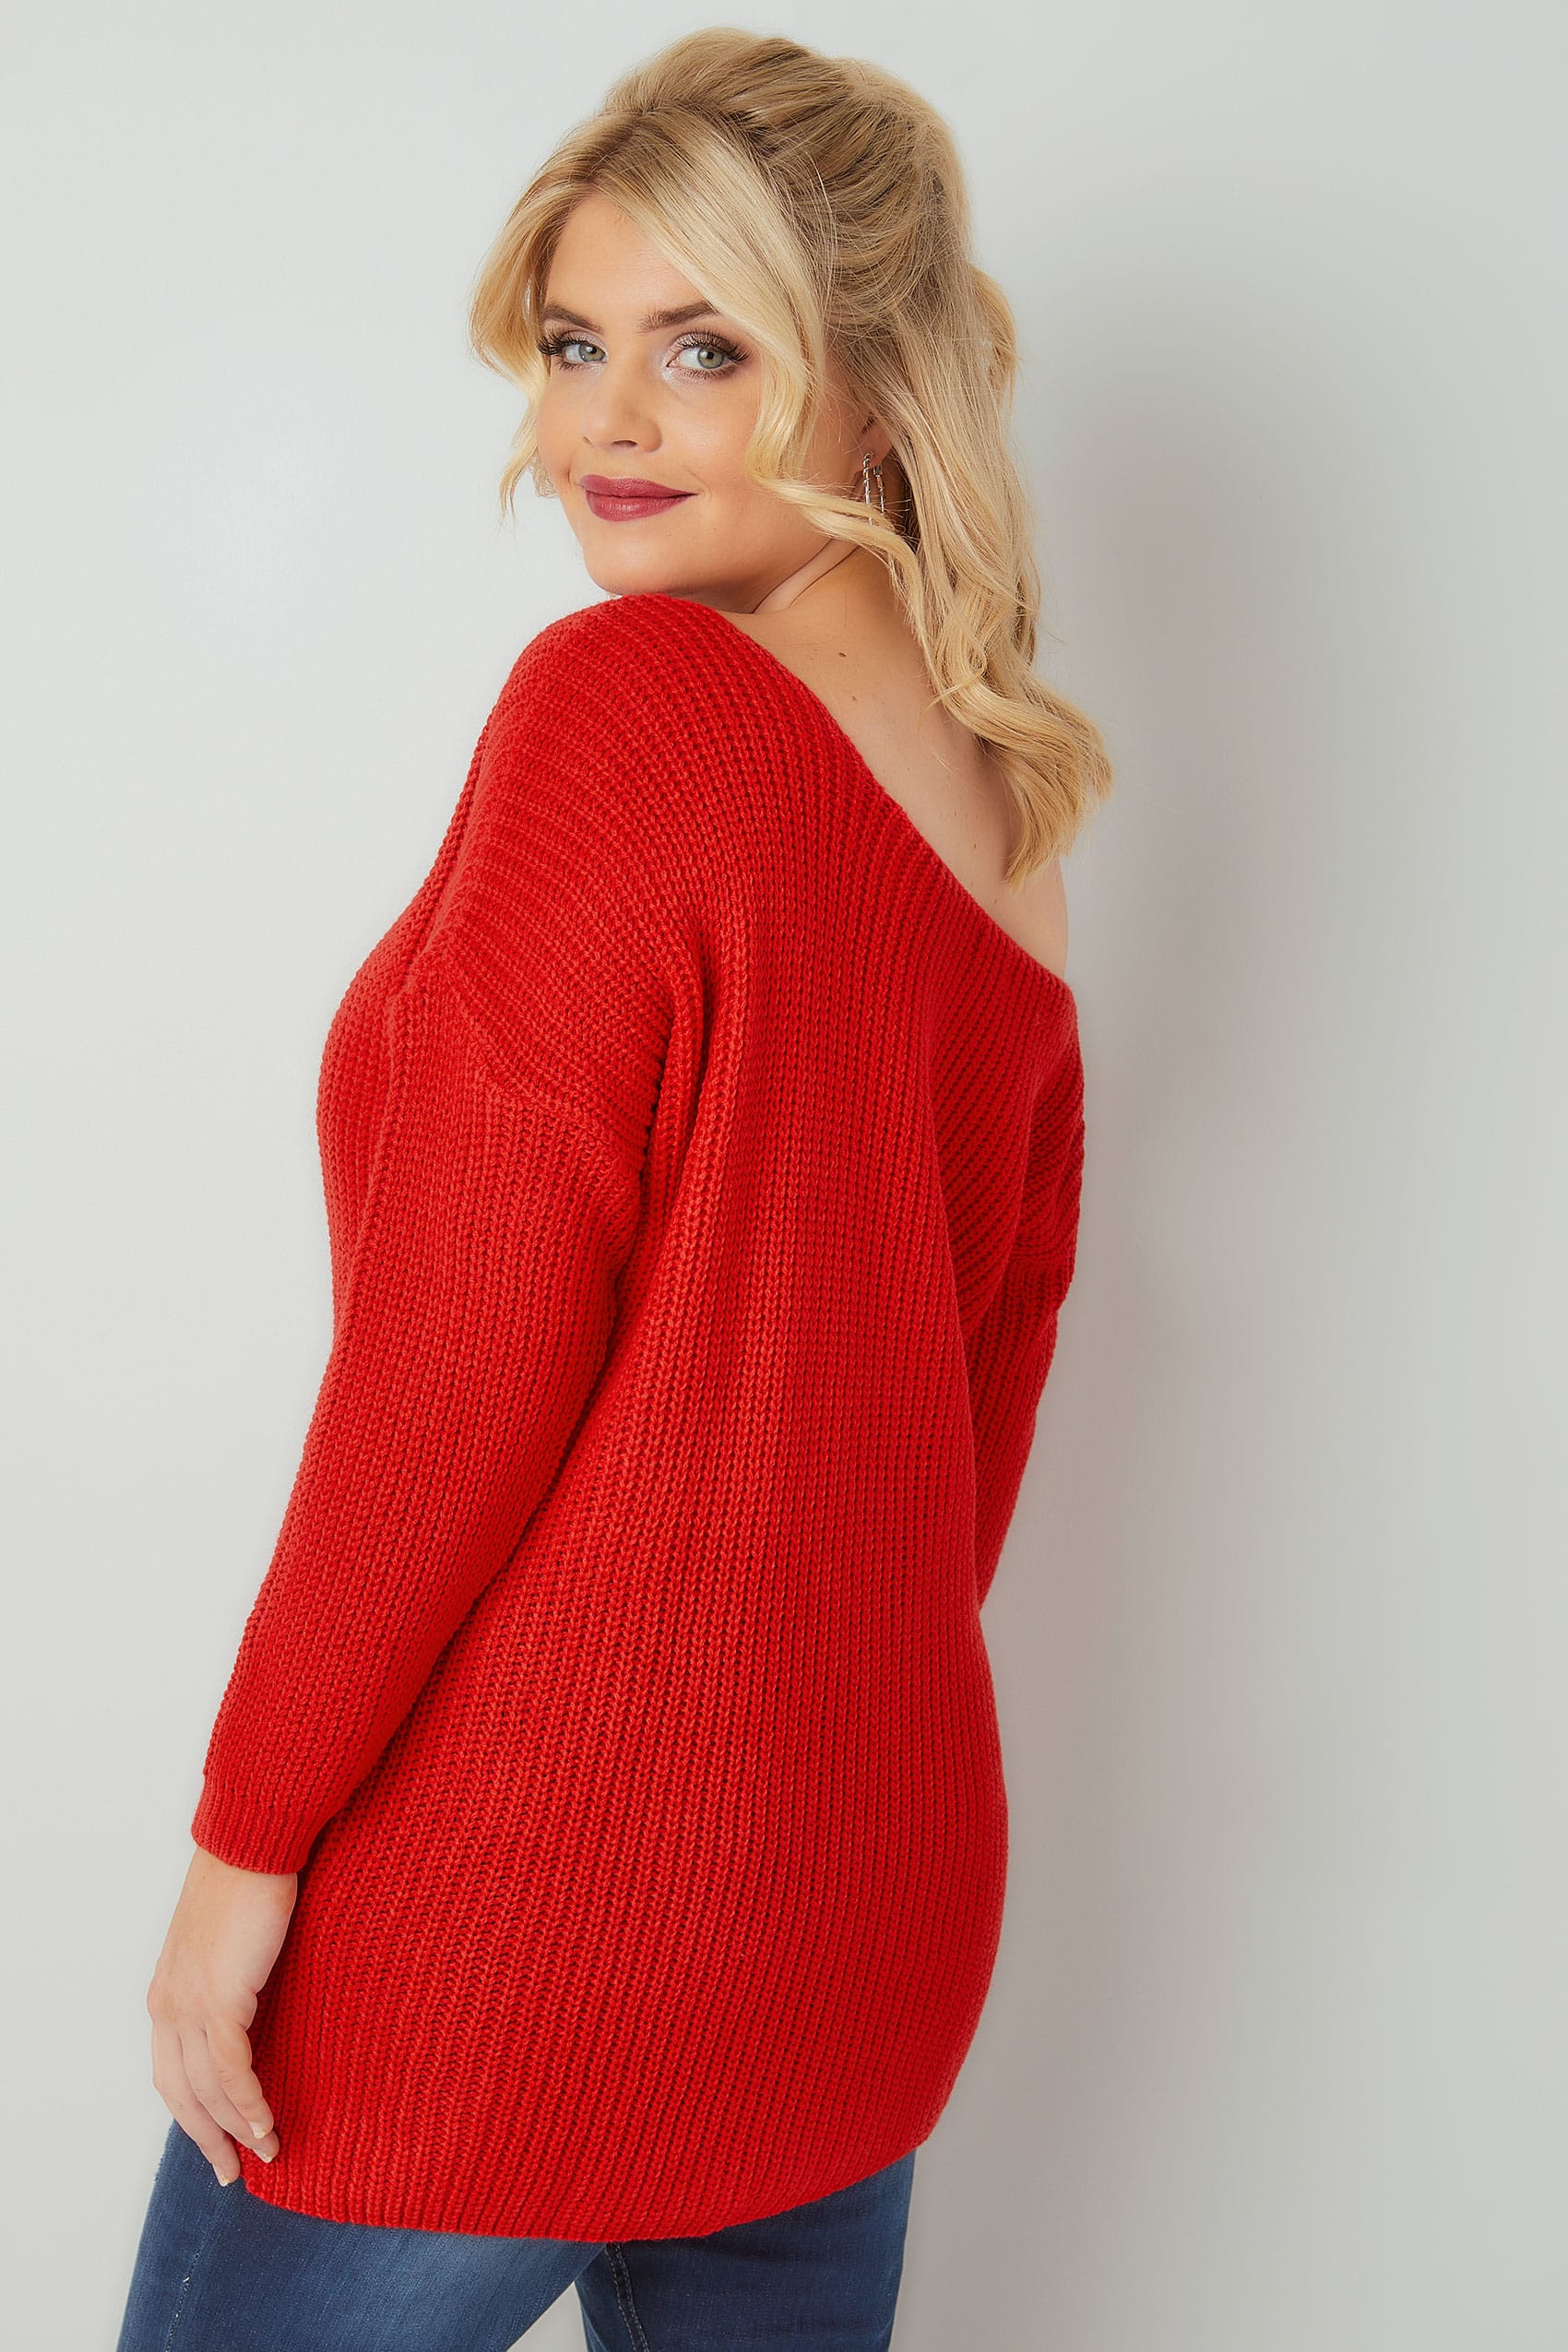 LIMITED COLLECTION Red Chunky Knit Asymmetric Jumper, Plus 